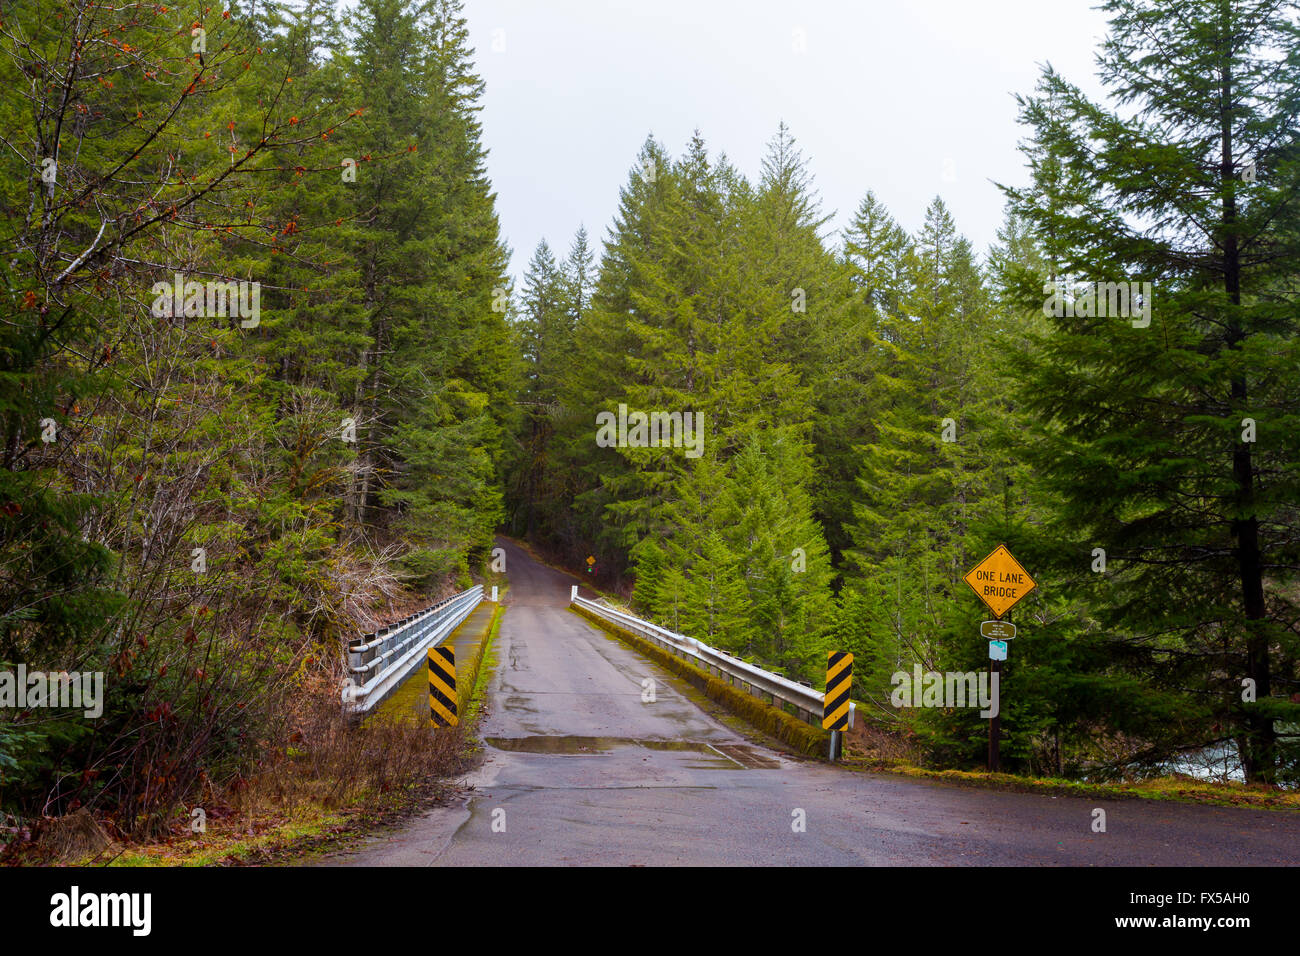 Forest area with a one lane bridge running over a small river in Oregon. Stock Photo